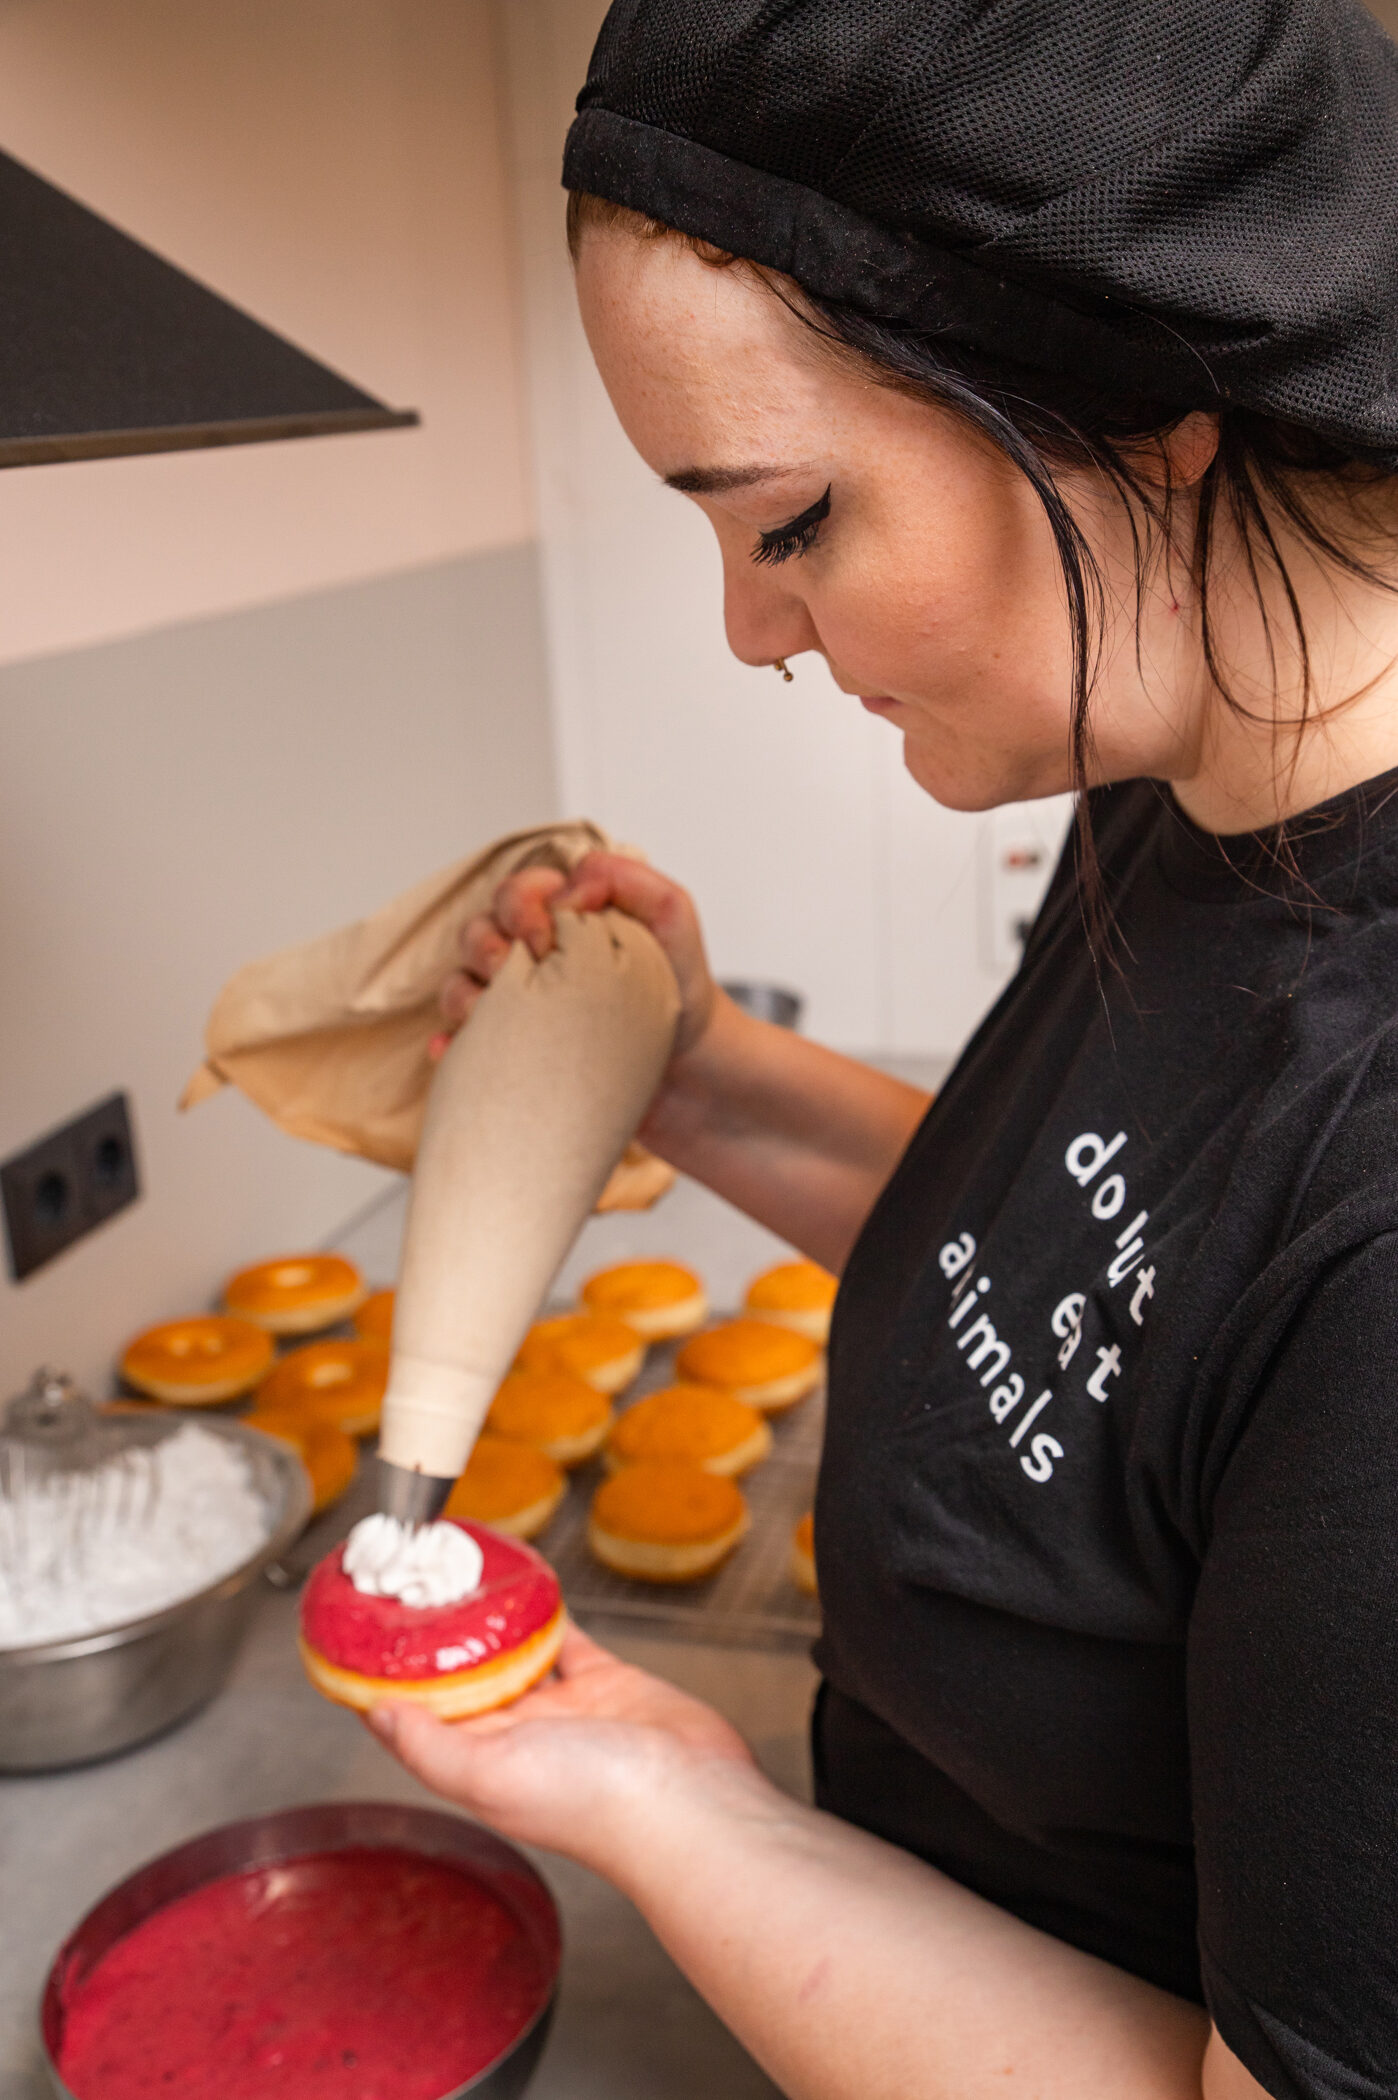 Melanie decorating a donut with a cream whip.